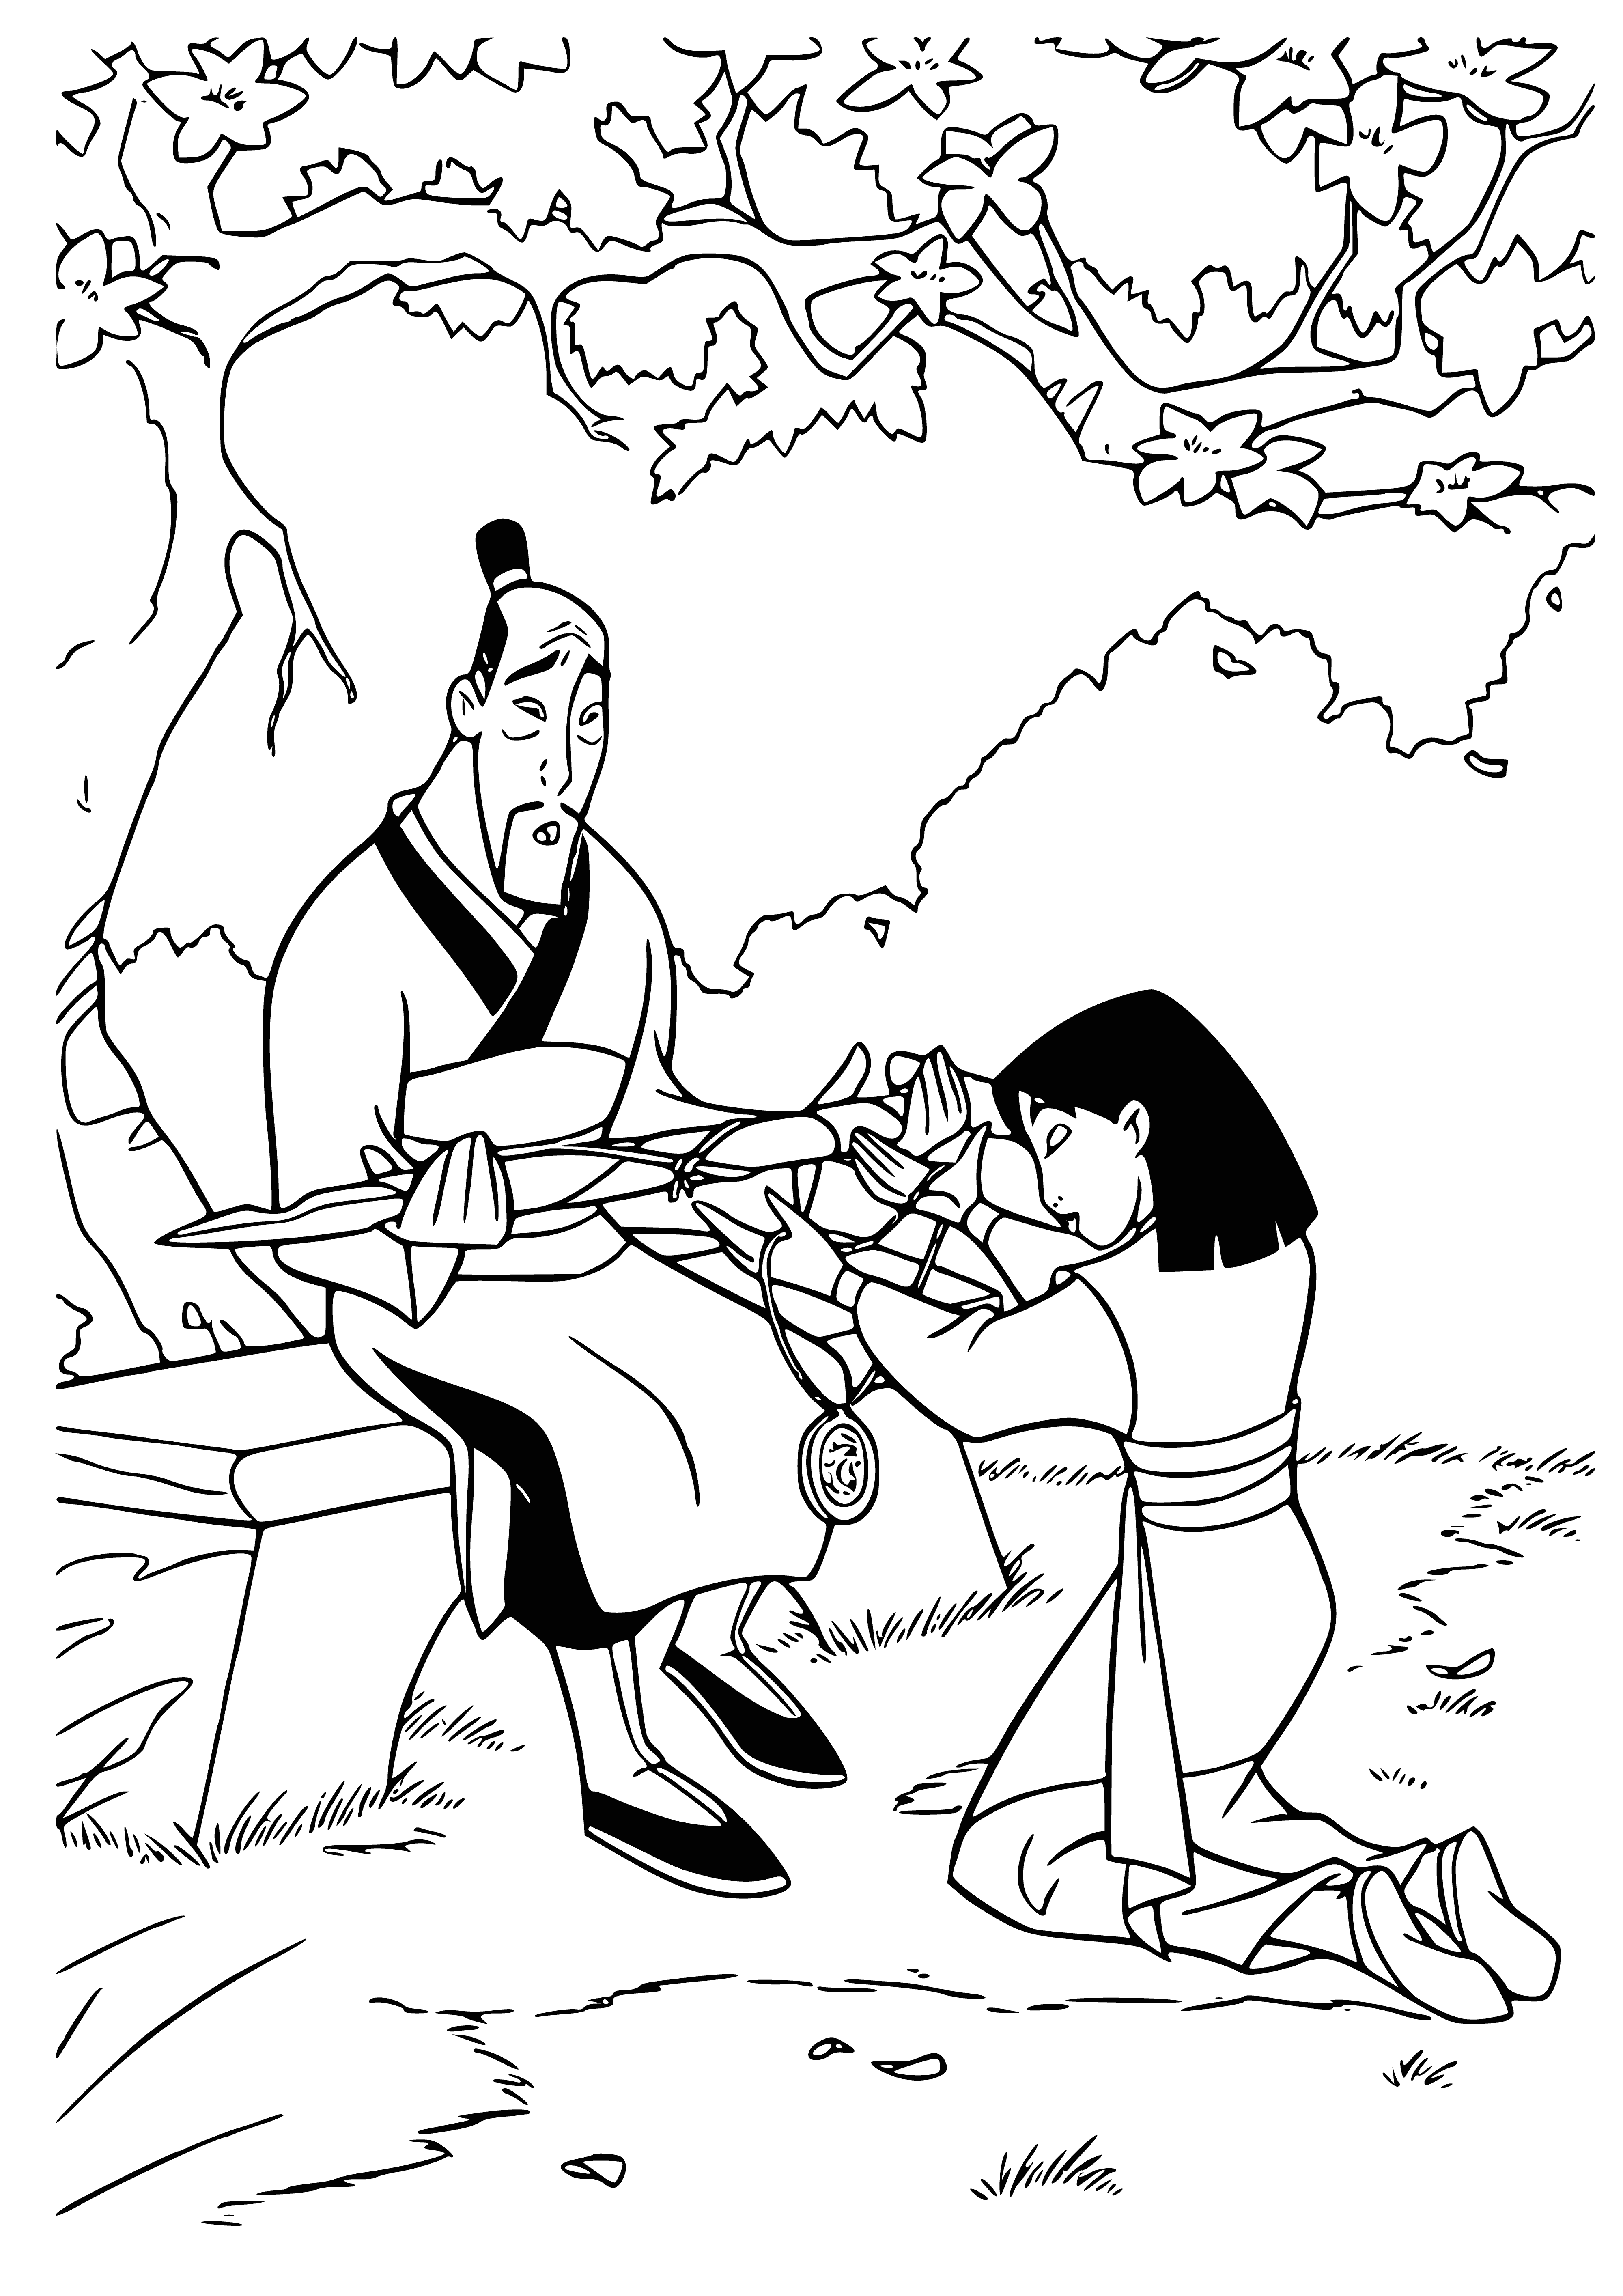 coloring page: Mulan sacrifices her own honor to save her father's, giving him her sword and taking his place in battle.